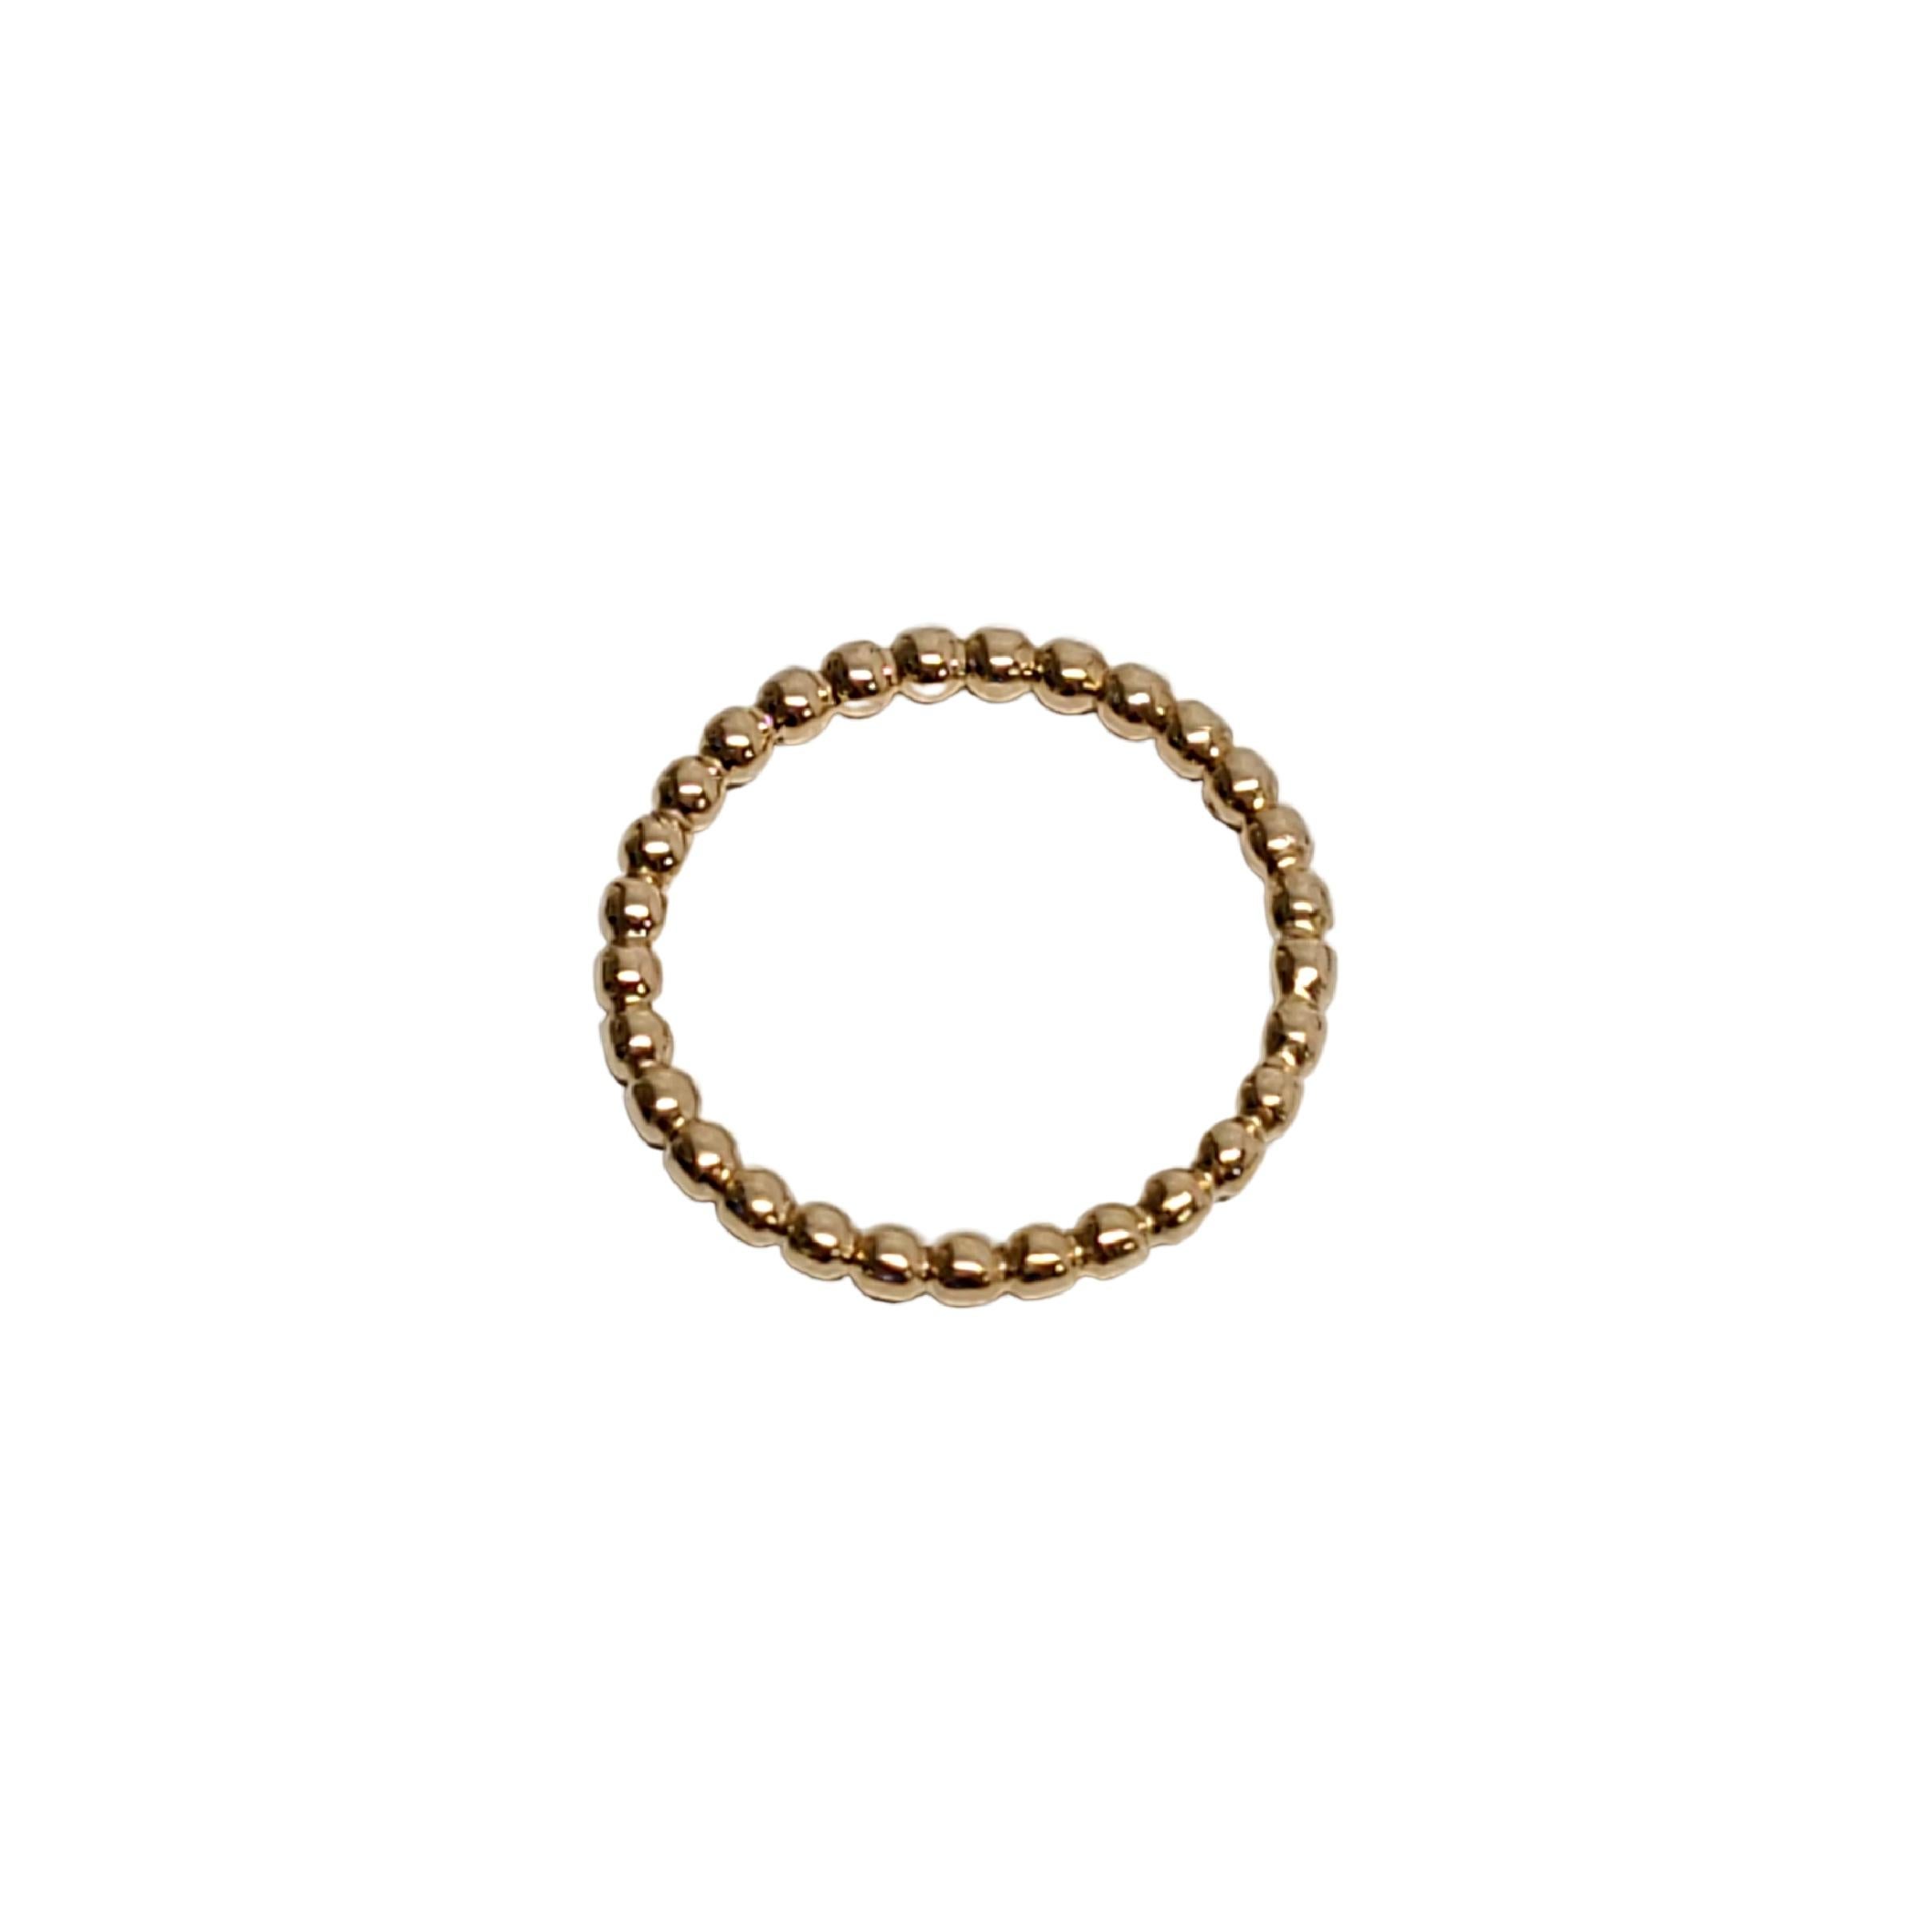 Pandora Eternal Clouds 14K yellow gold stackable Bubble ring.

US Size 7/Pandora size 54

This lovely Pandora stackable band features small bubbles all around the delicate band.

Weighs approx 1.3dwt, 2g

Marked G 585 ALE 54

Very good condition,